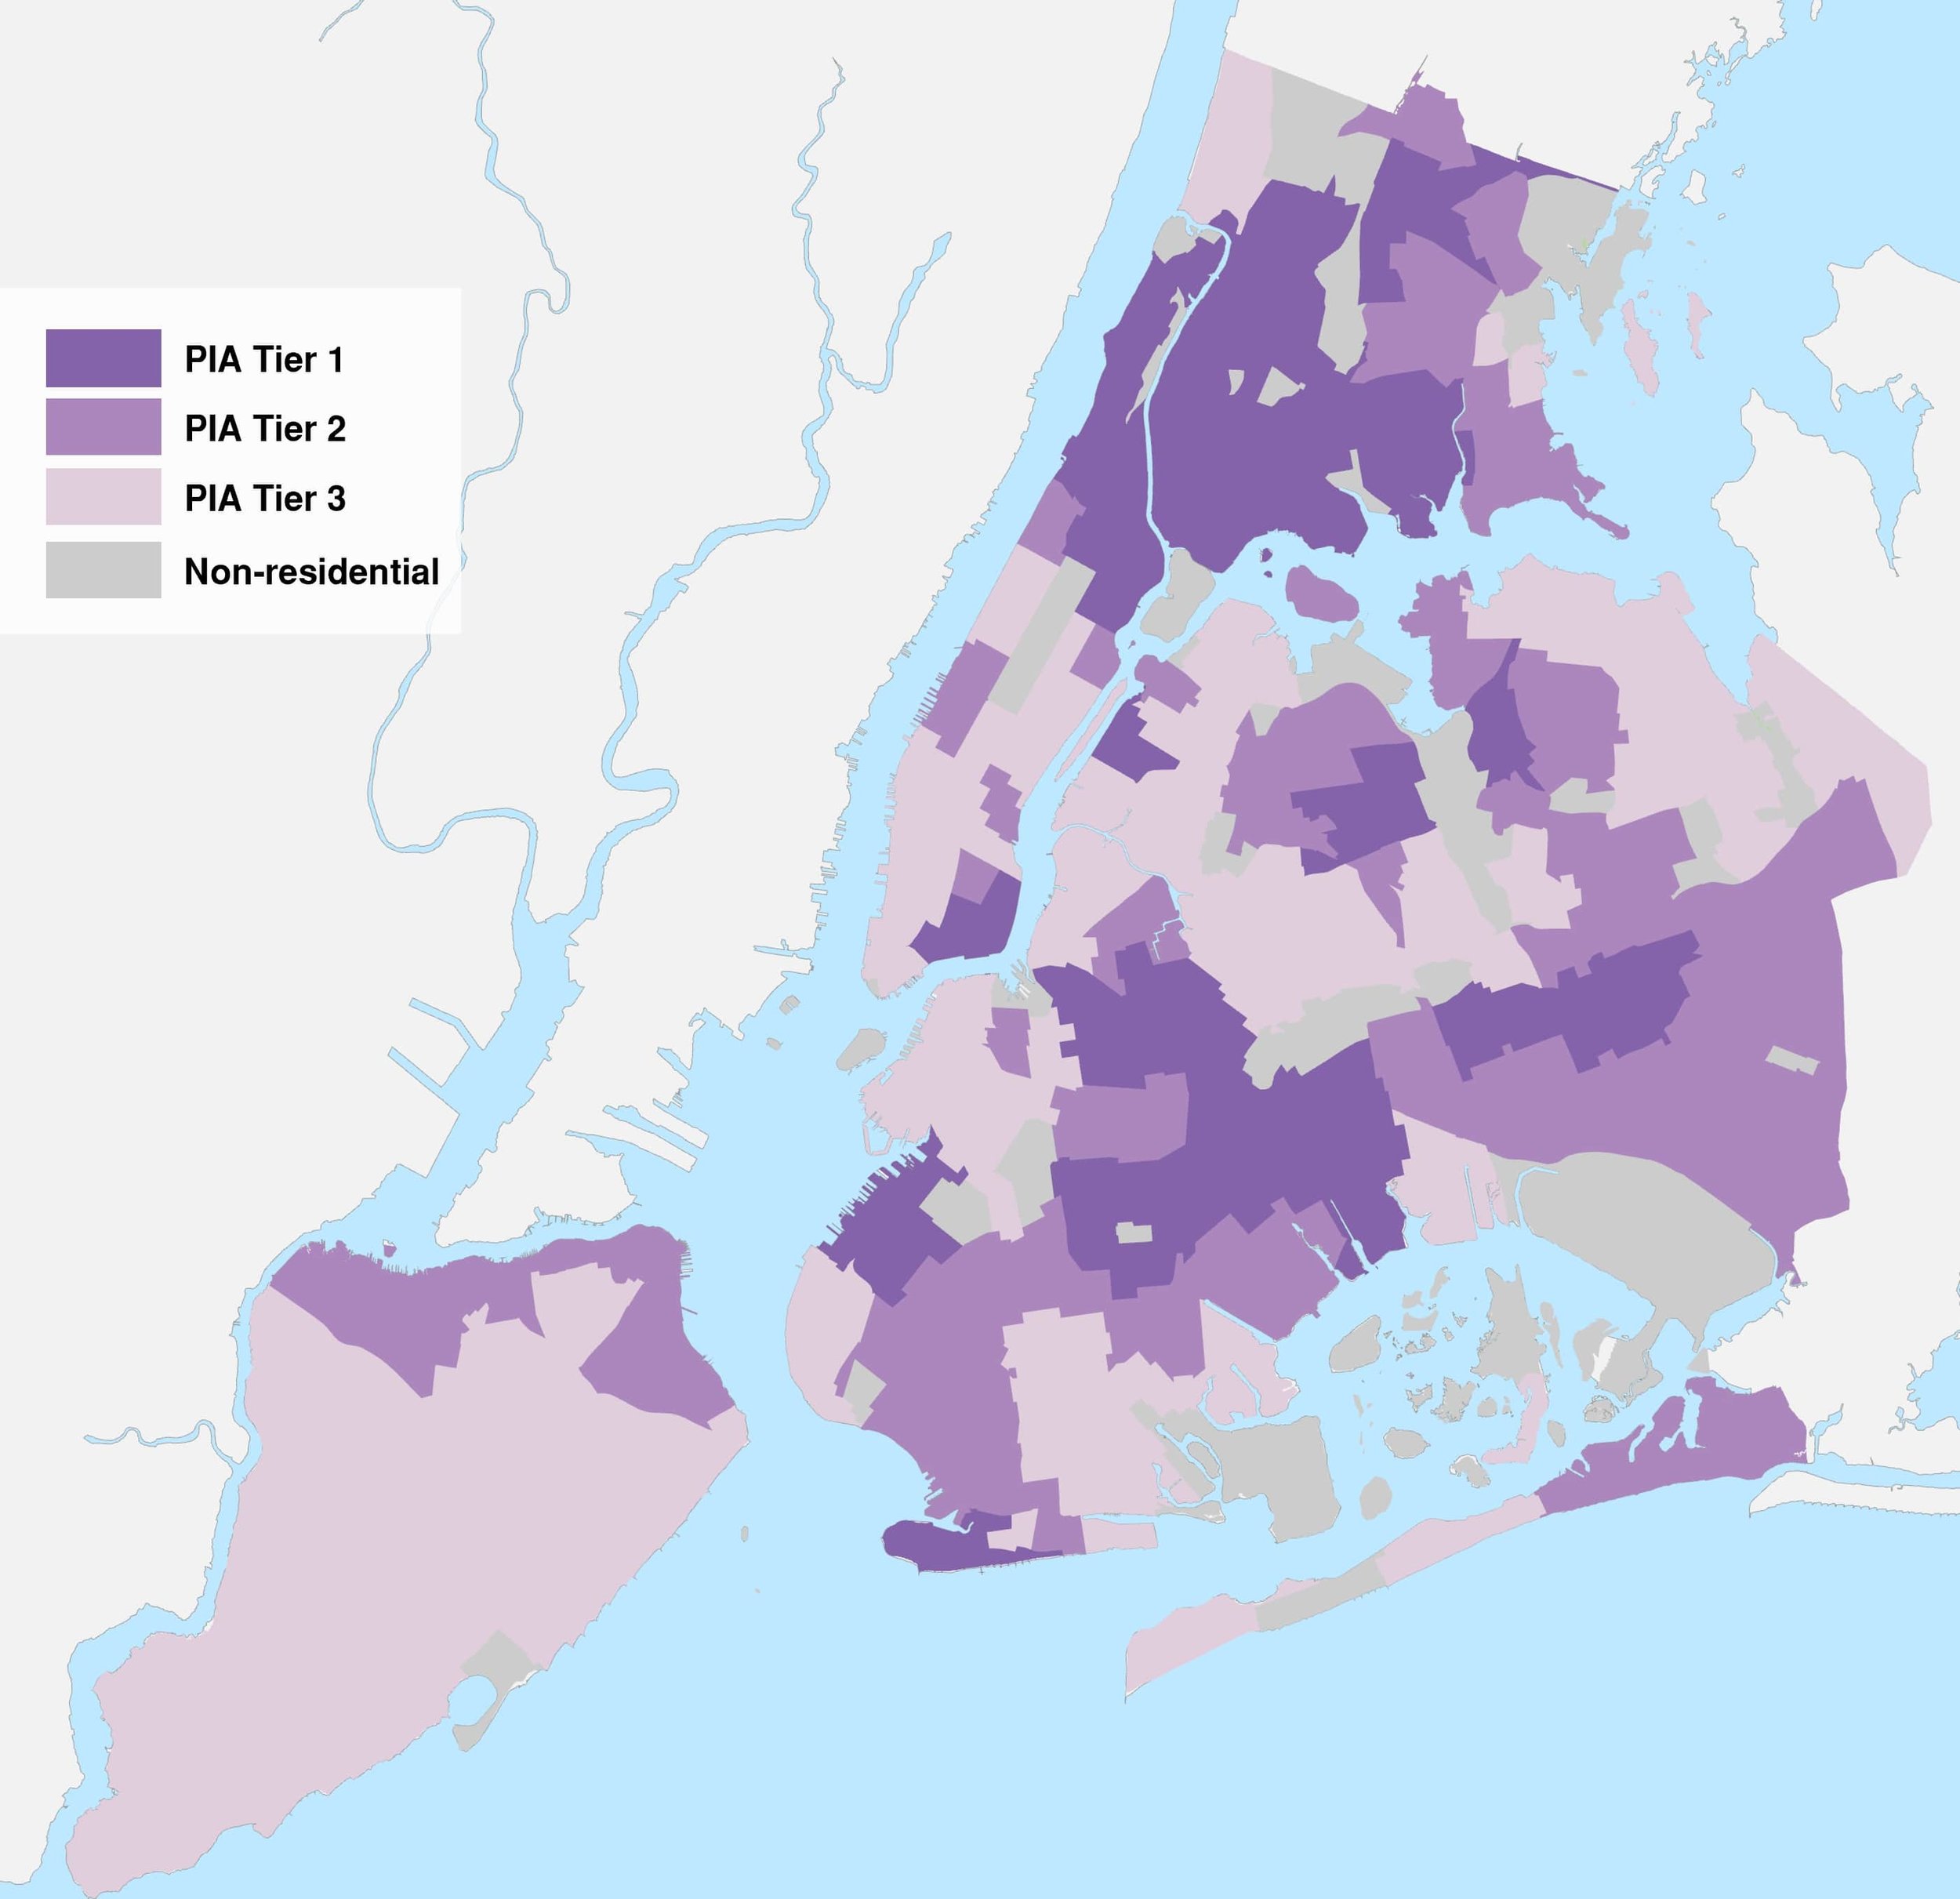 A map of DOT’s Priority Investment Areas (PIA) showing NYC neighborhoods colored according to their PIA tier. There are three tiers with tier 1 representing highest priority areas. Areas in northeast Brooklyn, north Manhattan, south Bronx, and parts of Queens fall under tier 1. Courtesy of NYC DOT.